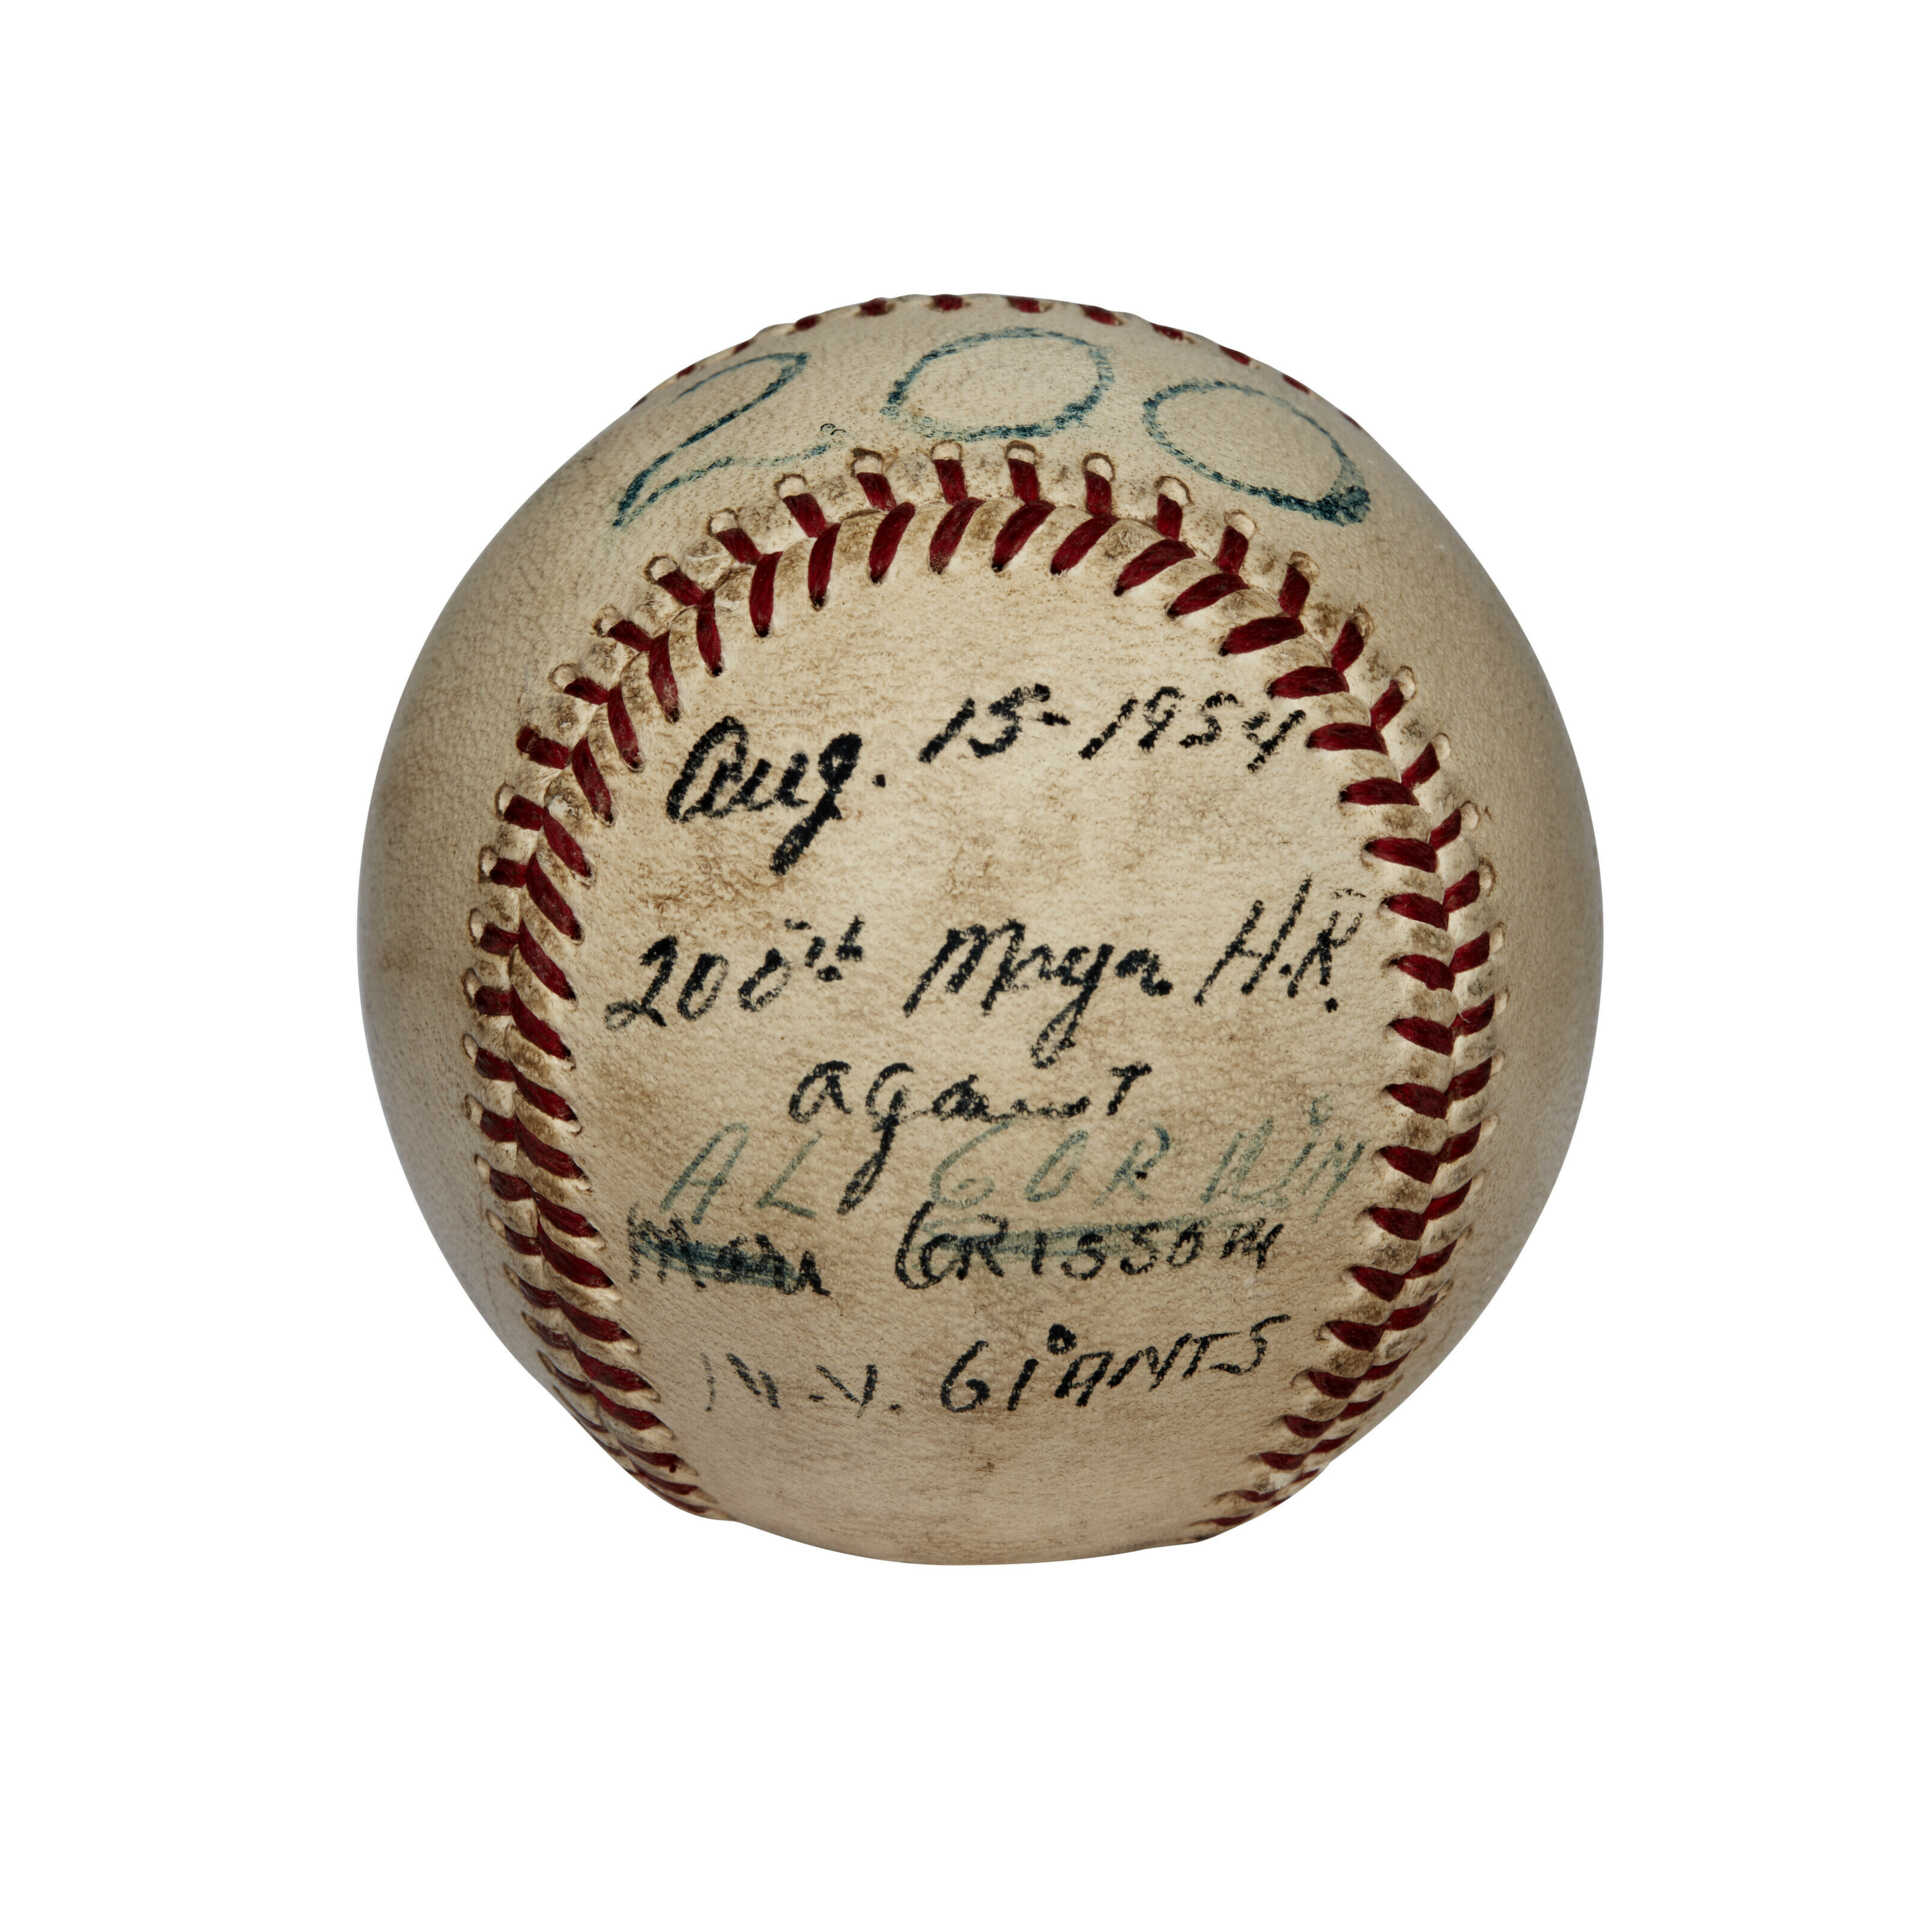 1954 GIL HODGES 200TH CAREER HOME RUN BASEBALL WITH PHOTOGRAPHIC DOCUMENTATION (PHOTO MATCH)